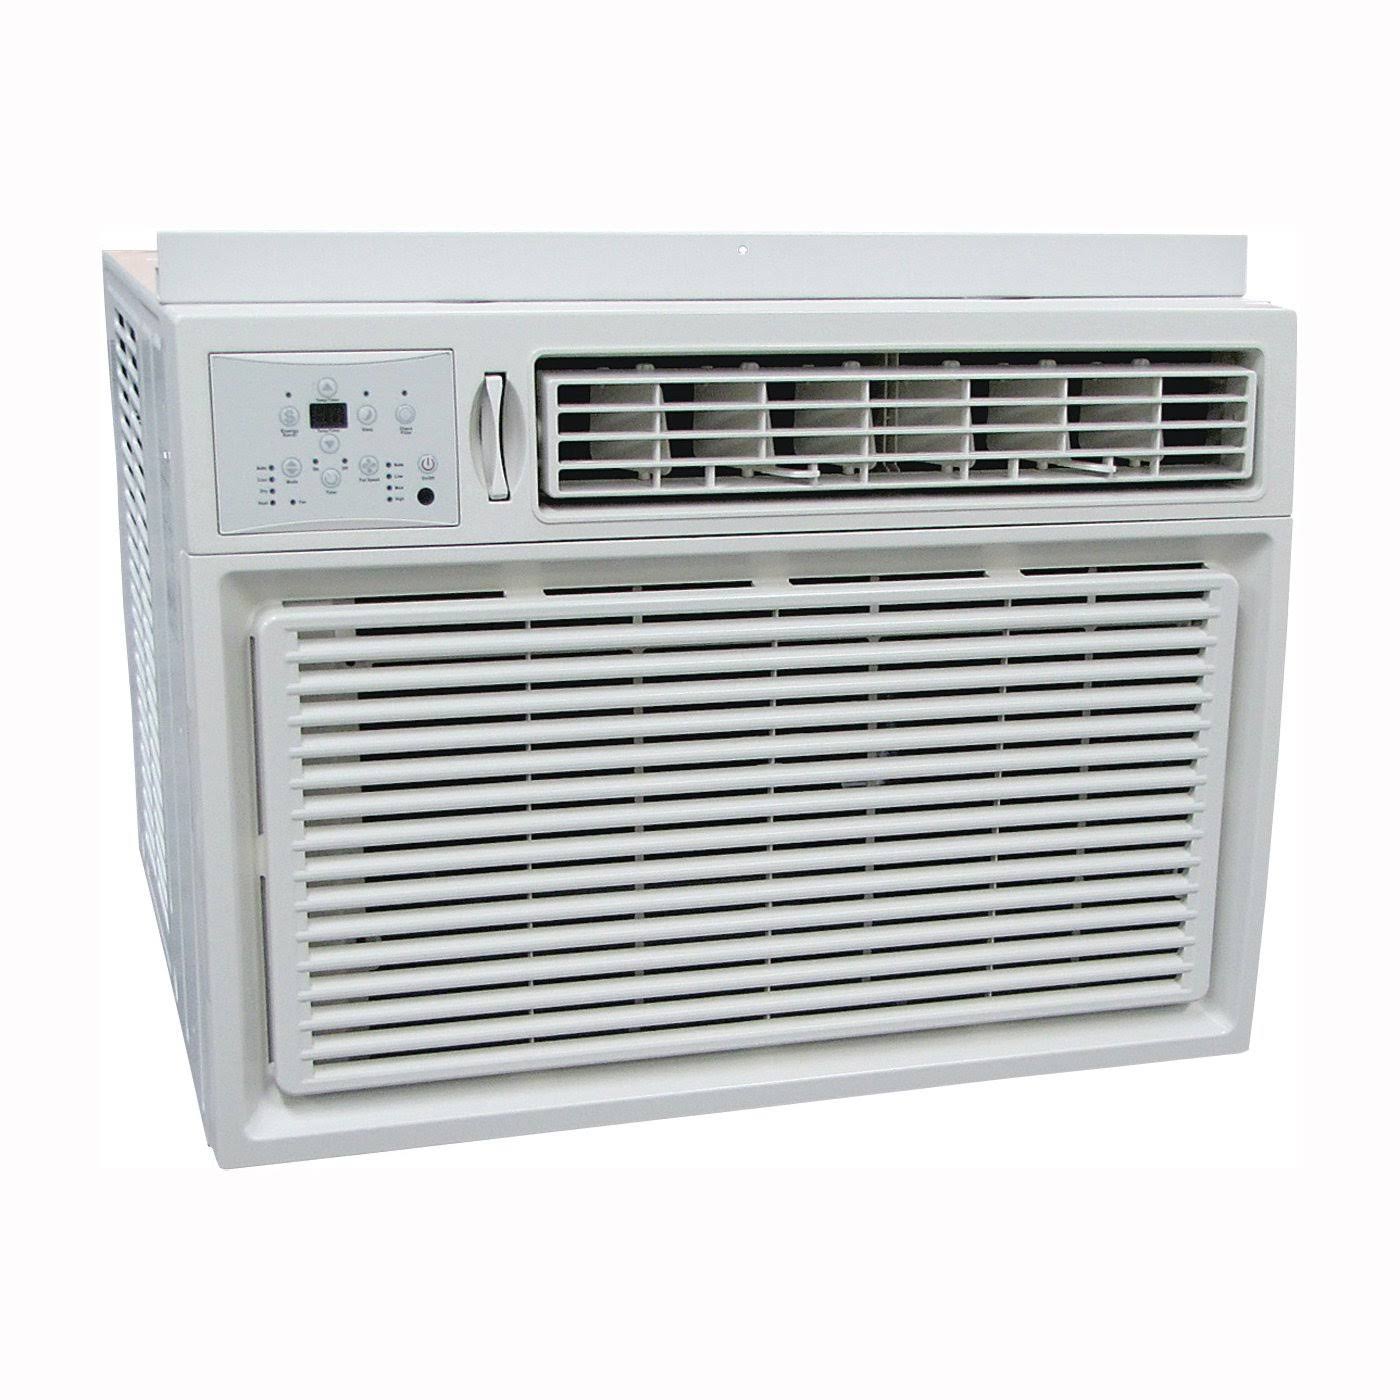 Comfort-Aire 15,000 BTU Window Air Conditioner with Remote